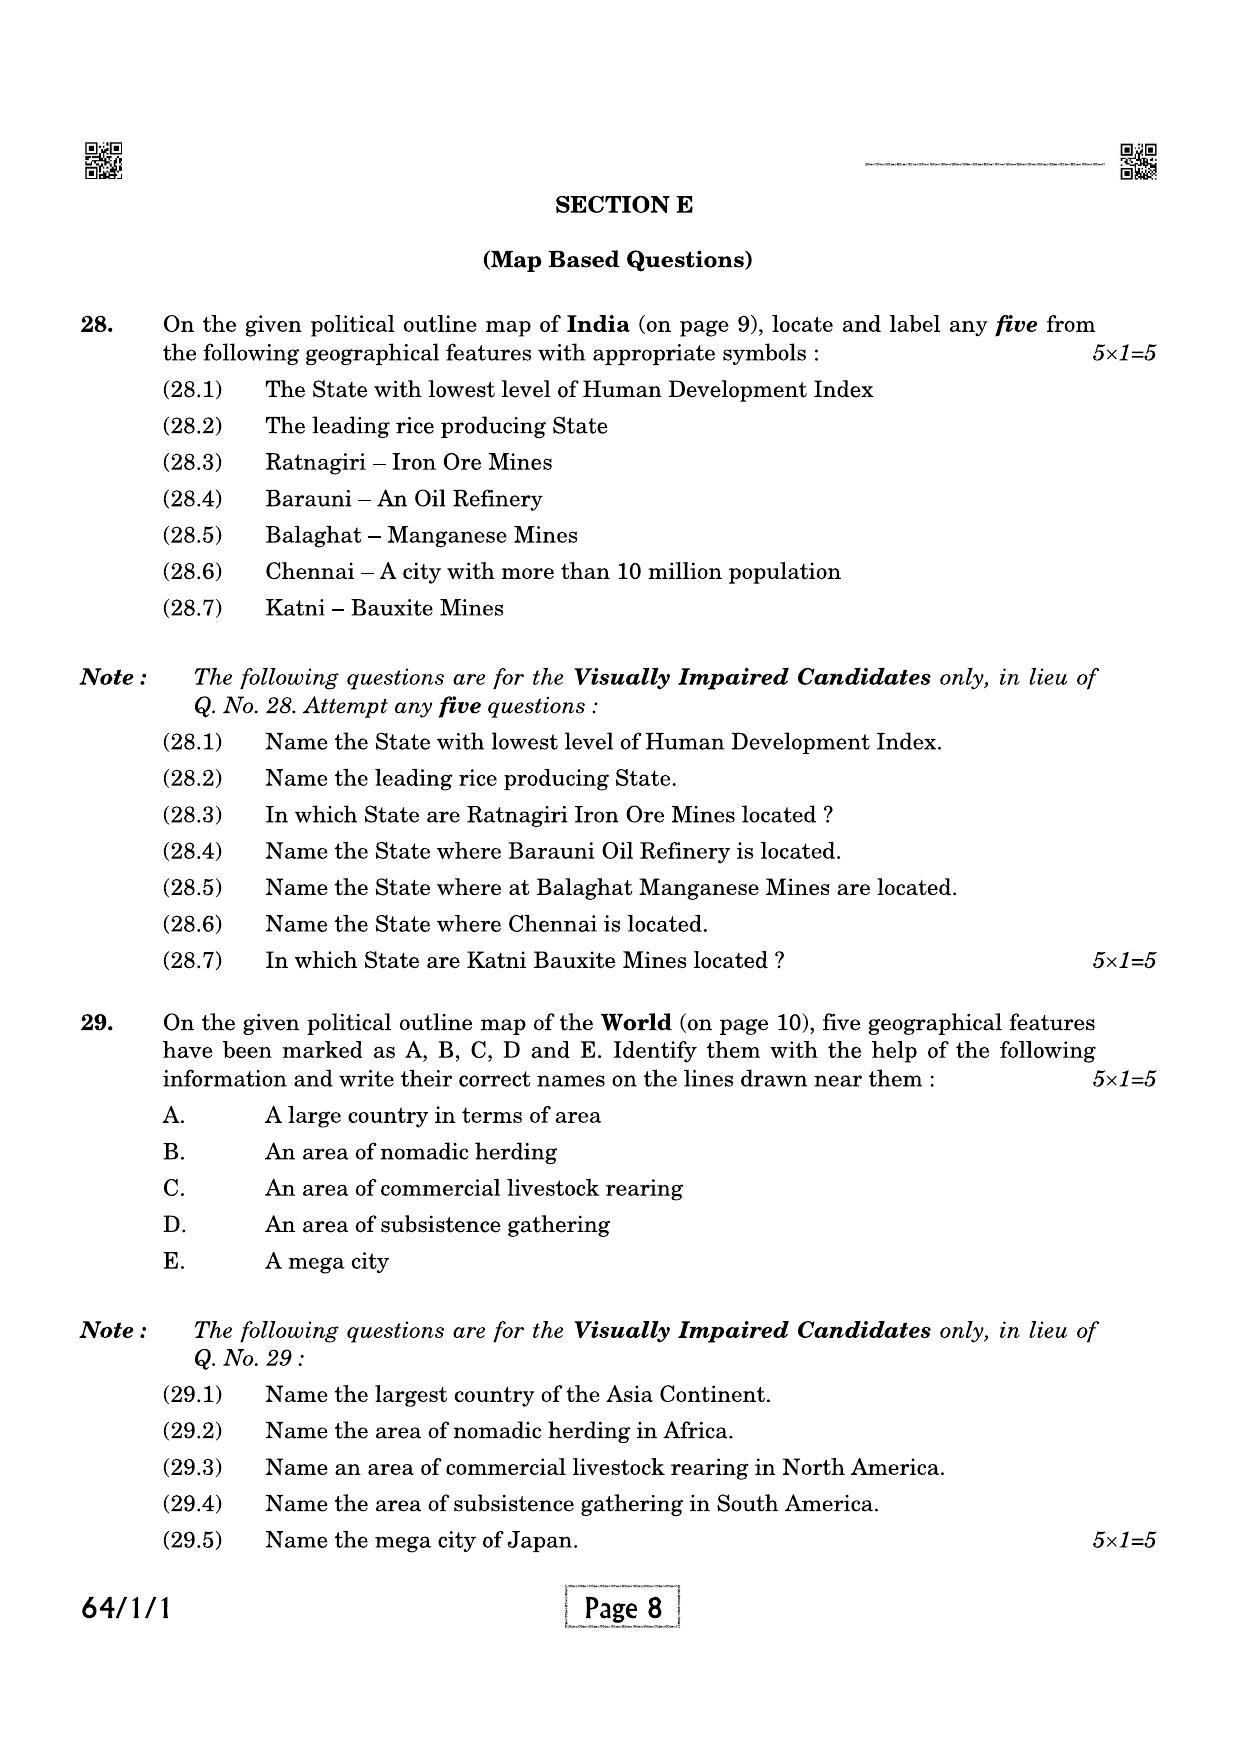 CBSE Class 12 QP_029_Geography 2021 Compartment Question Paper - Page 8